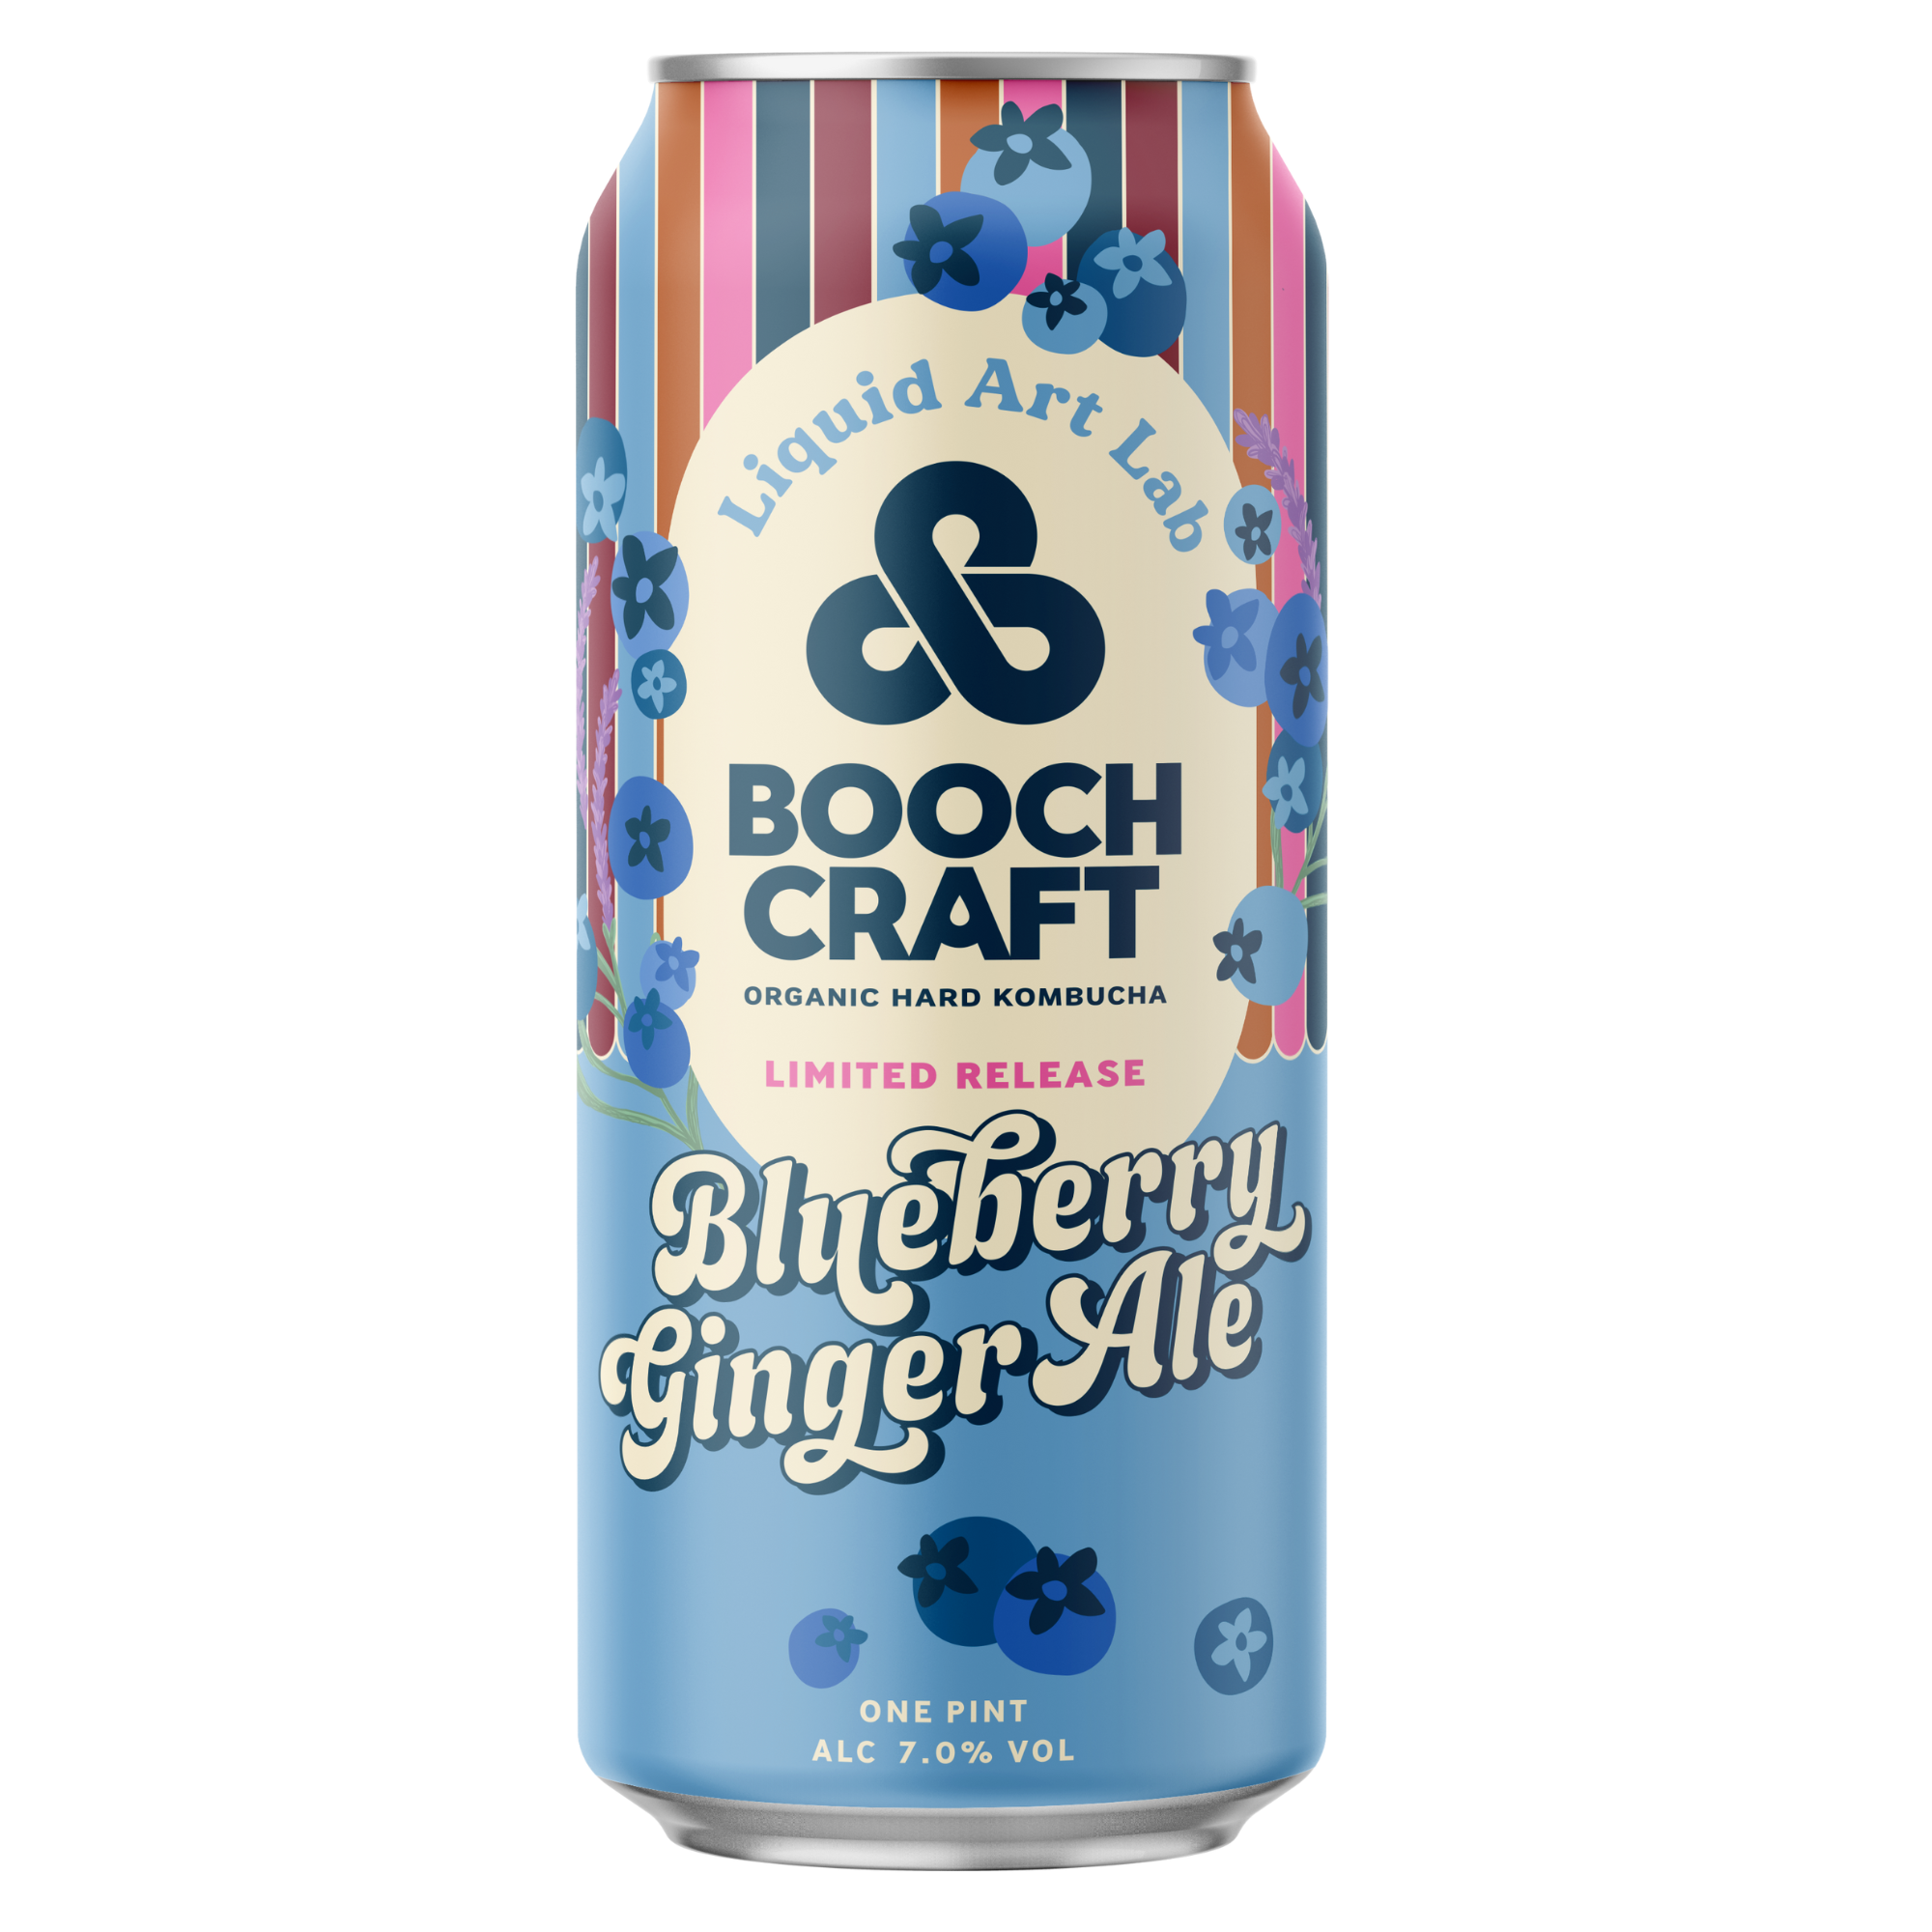 Blueberry Ginger Ale